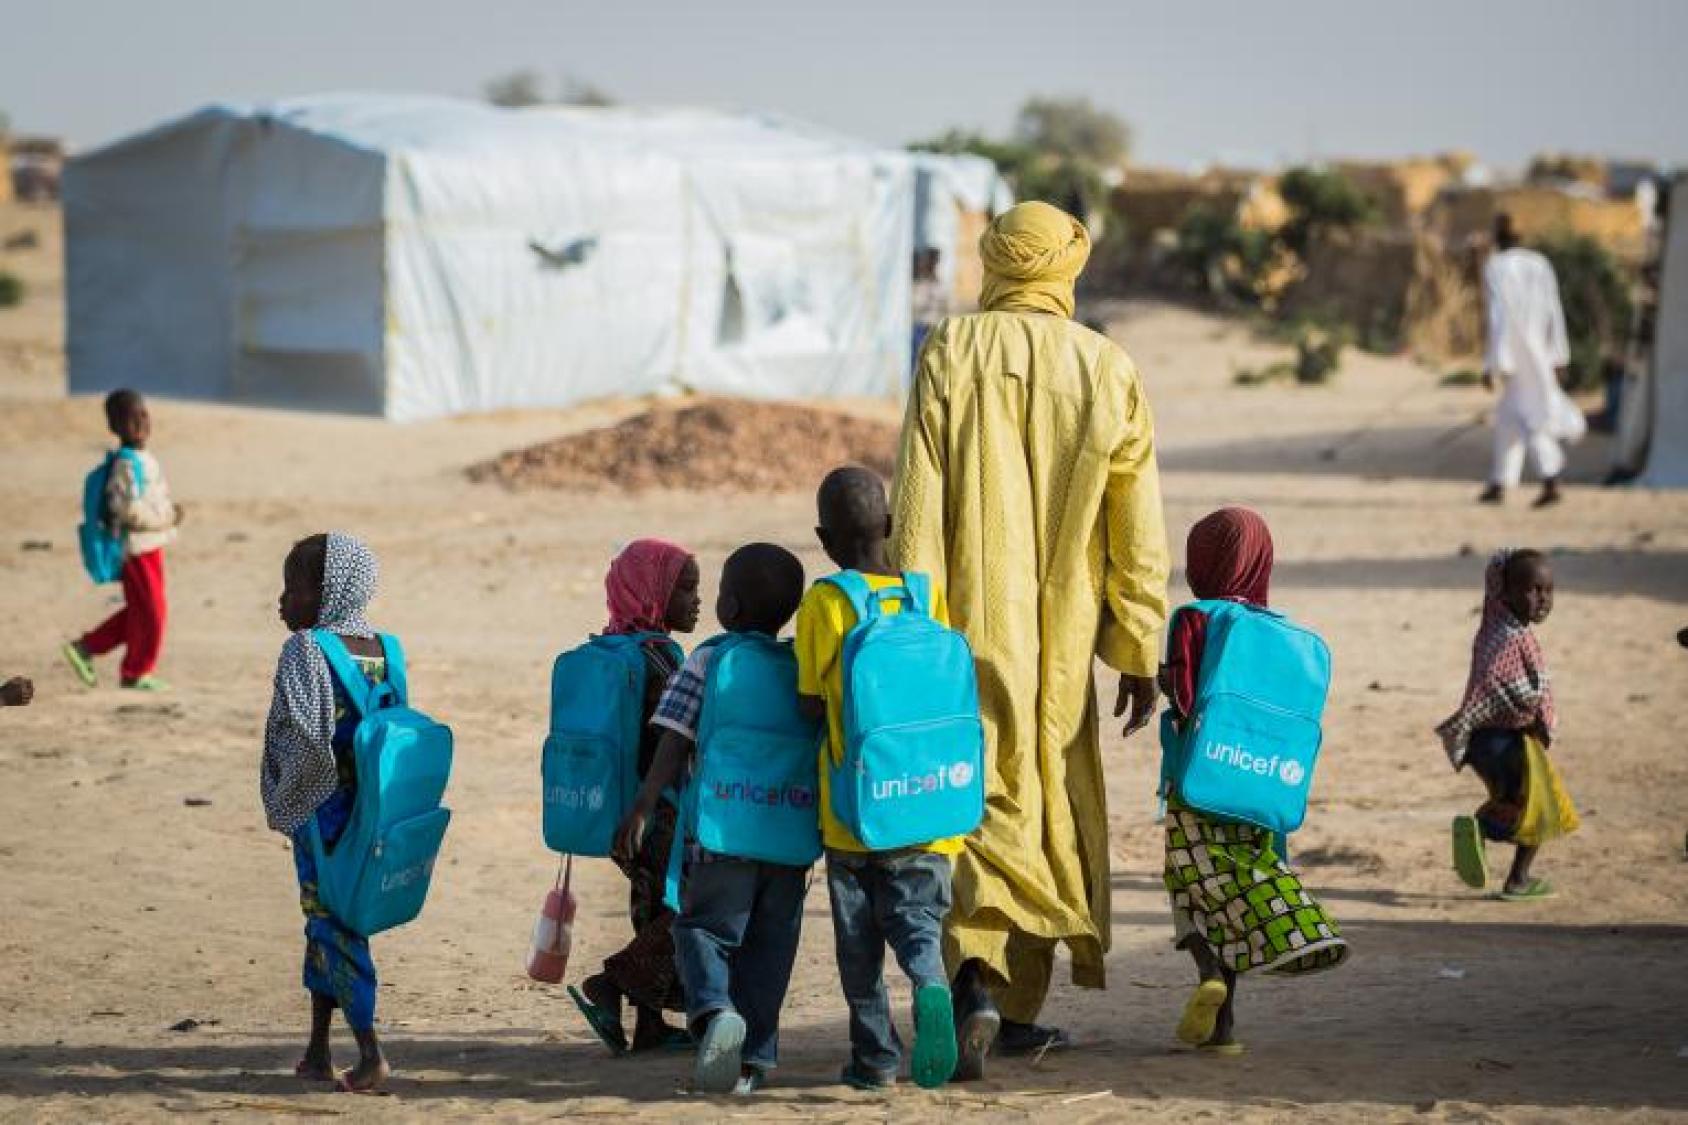 A group of young children wear blue UNICEF backpacks as they walk with an adult near tents.